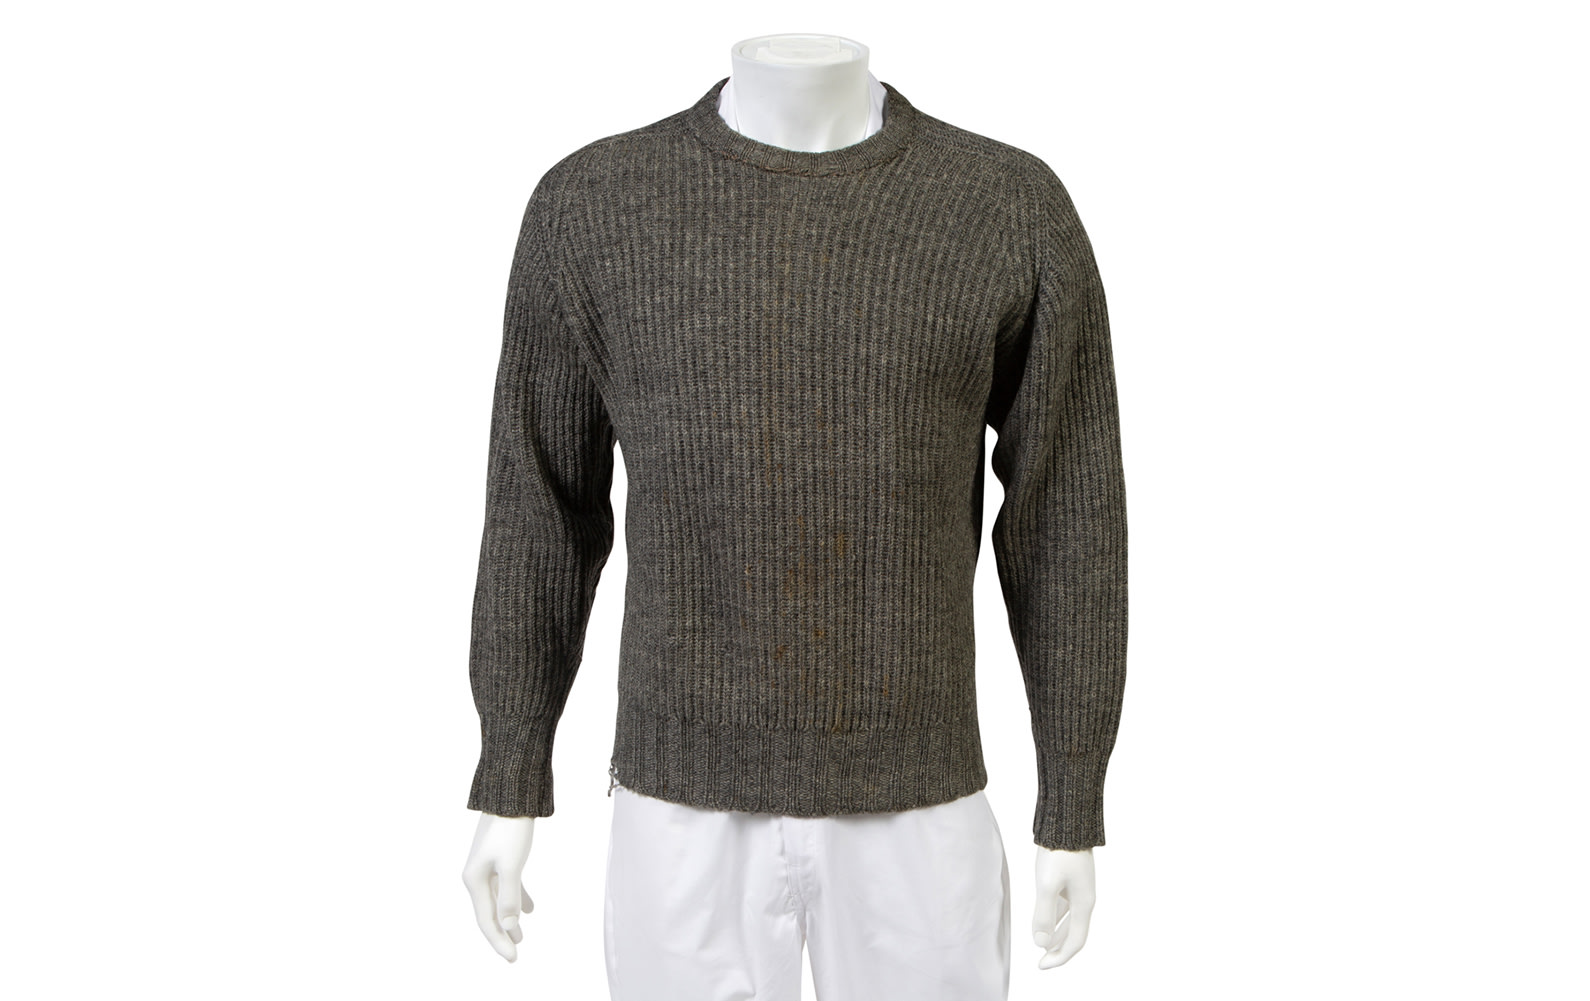 Harrods Ltd. Wool Sweater, Worn Extensively by Phil Hill During his Racing Career